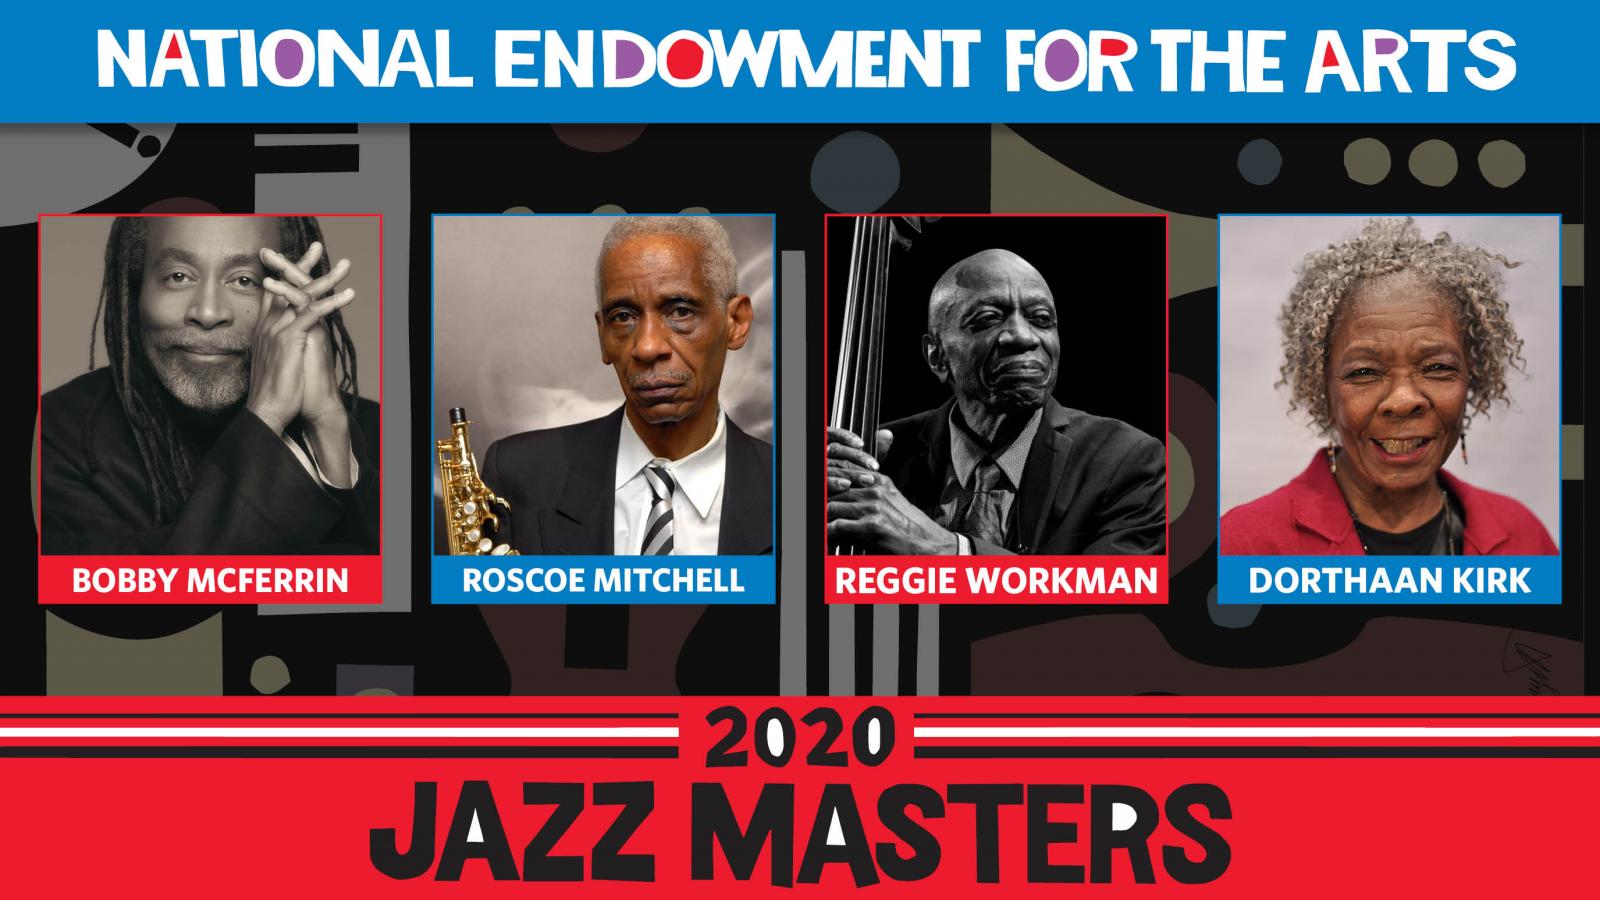 Photos of the 2020 Jazz Masters with text saying "National Endowment for the Arts 2020 Jazz Masters"